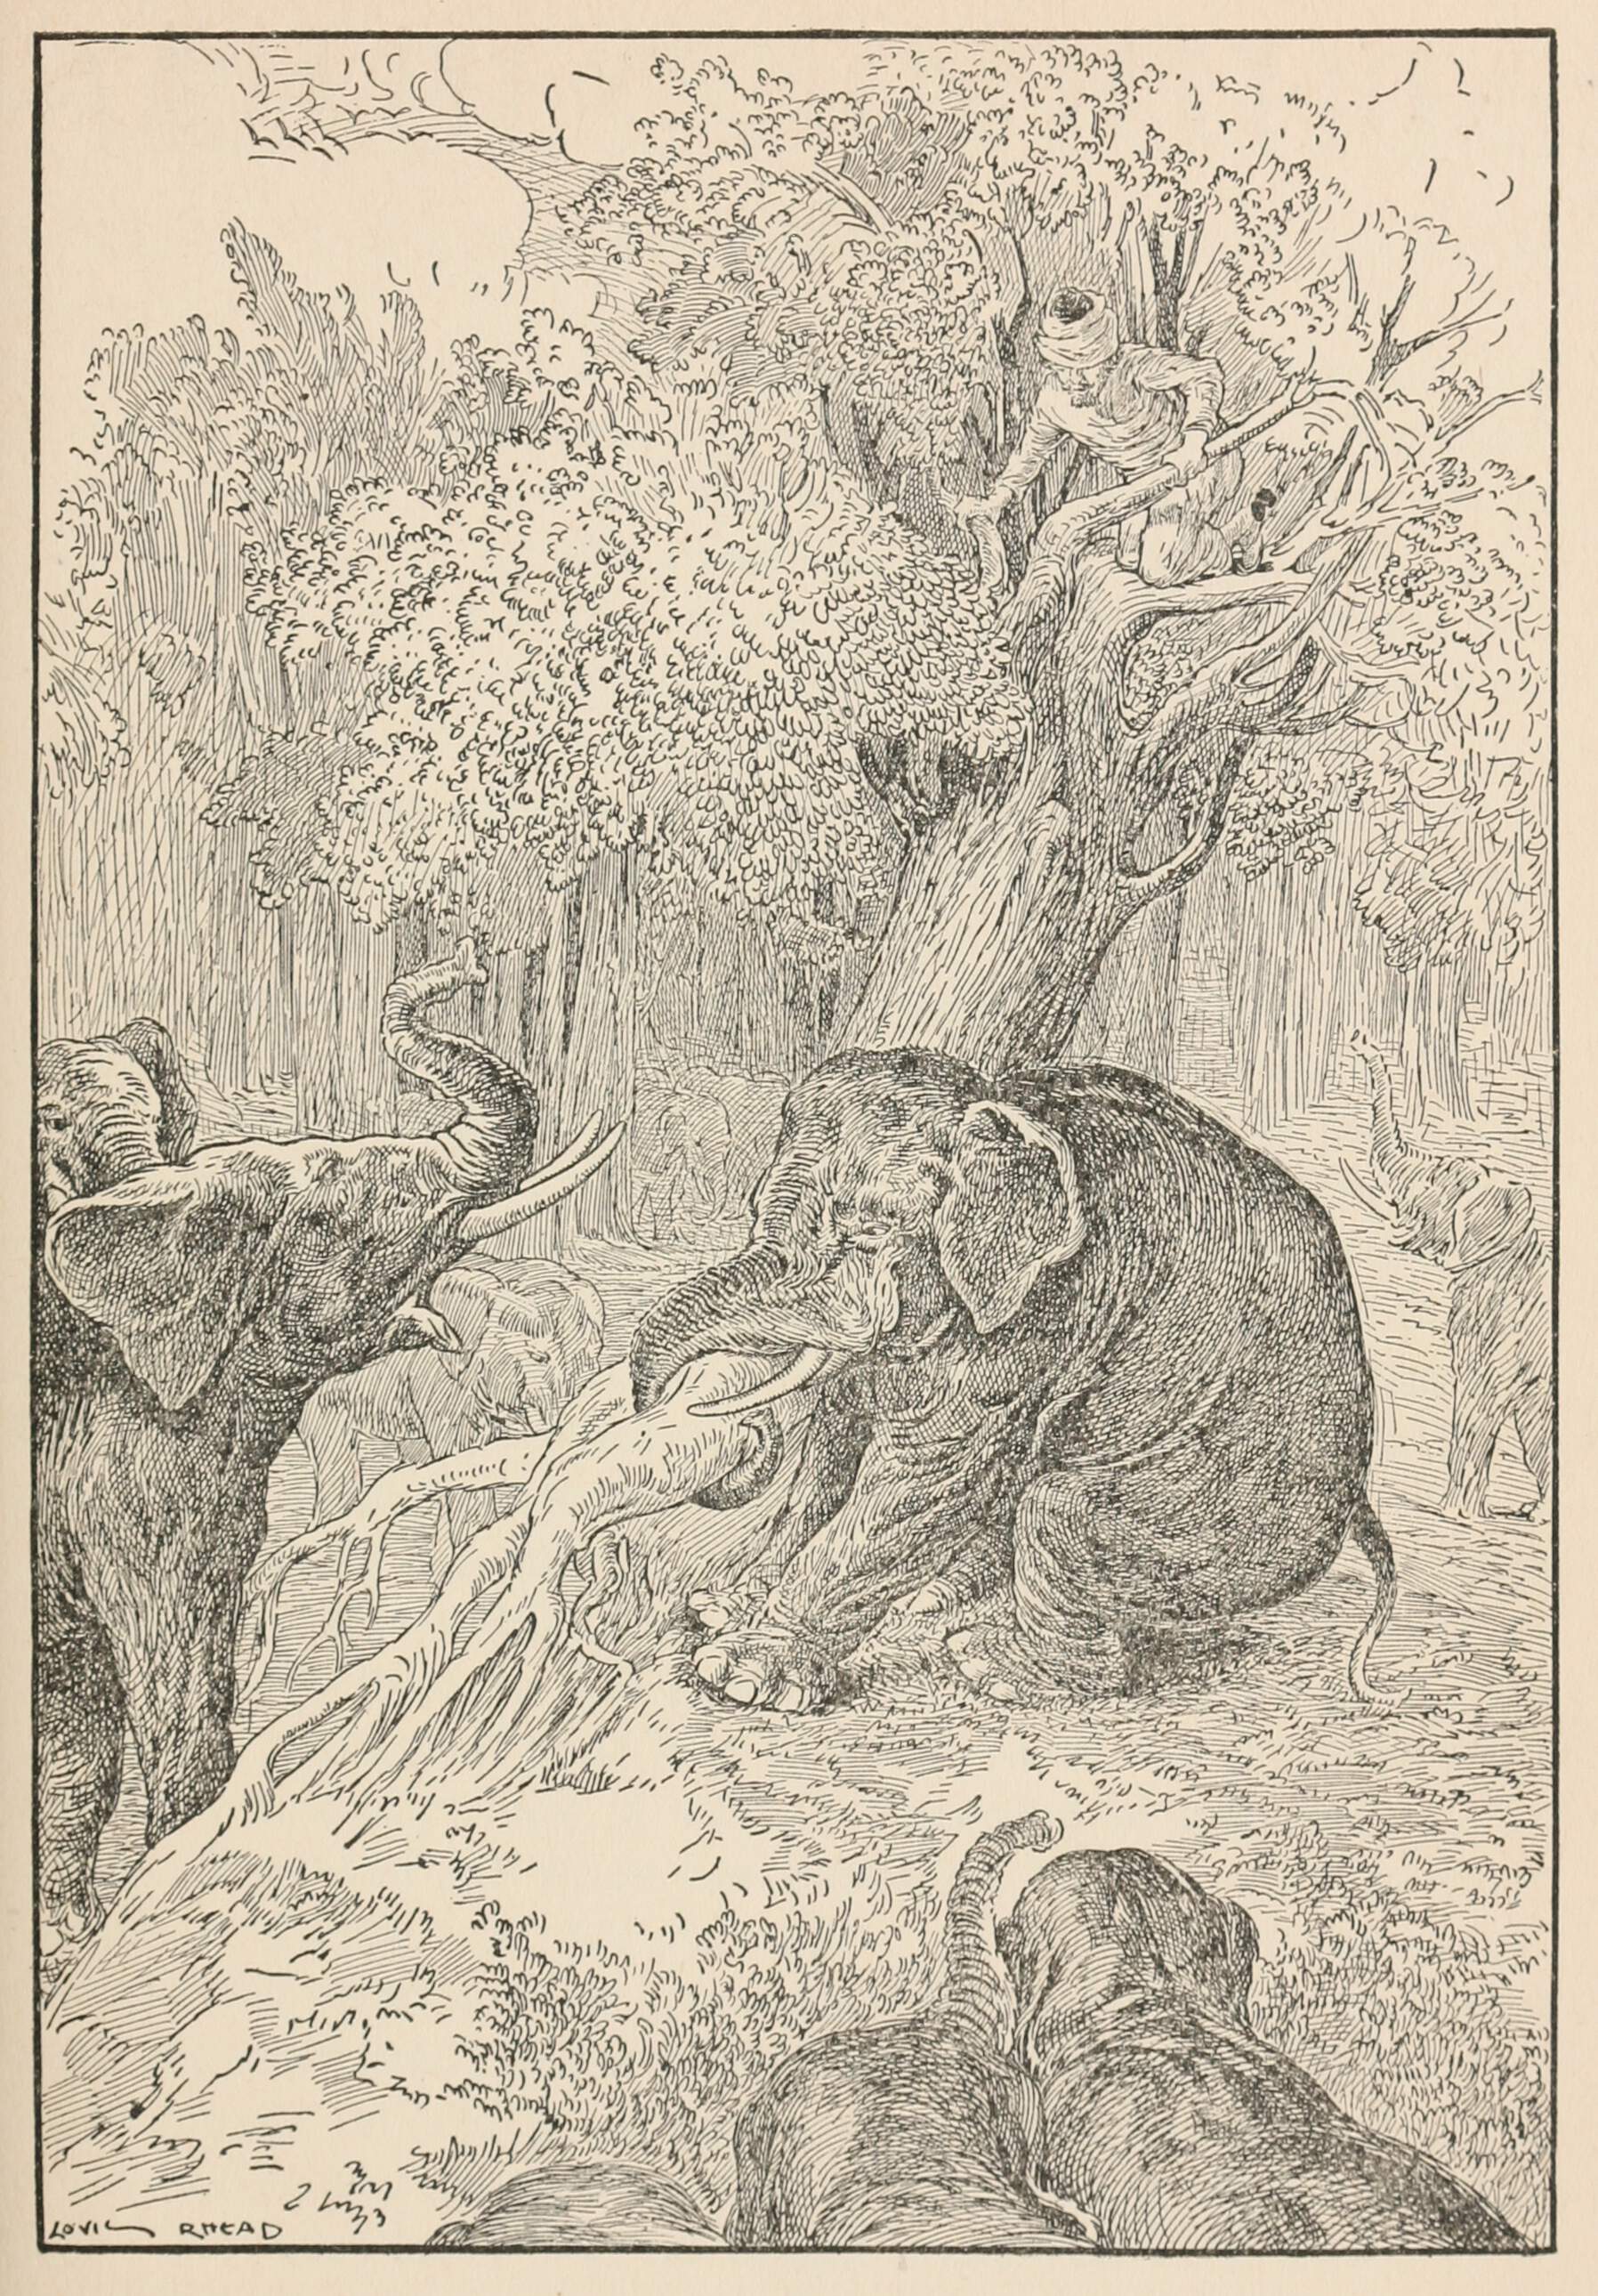 The Elephant Tore Up the Tree | Old Book Illustrations